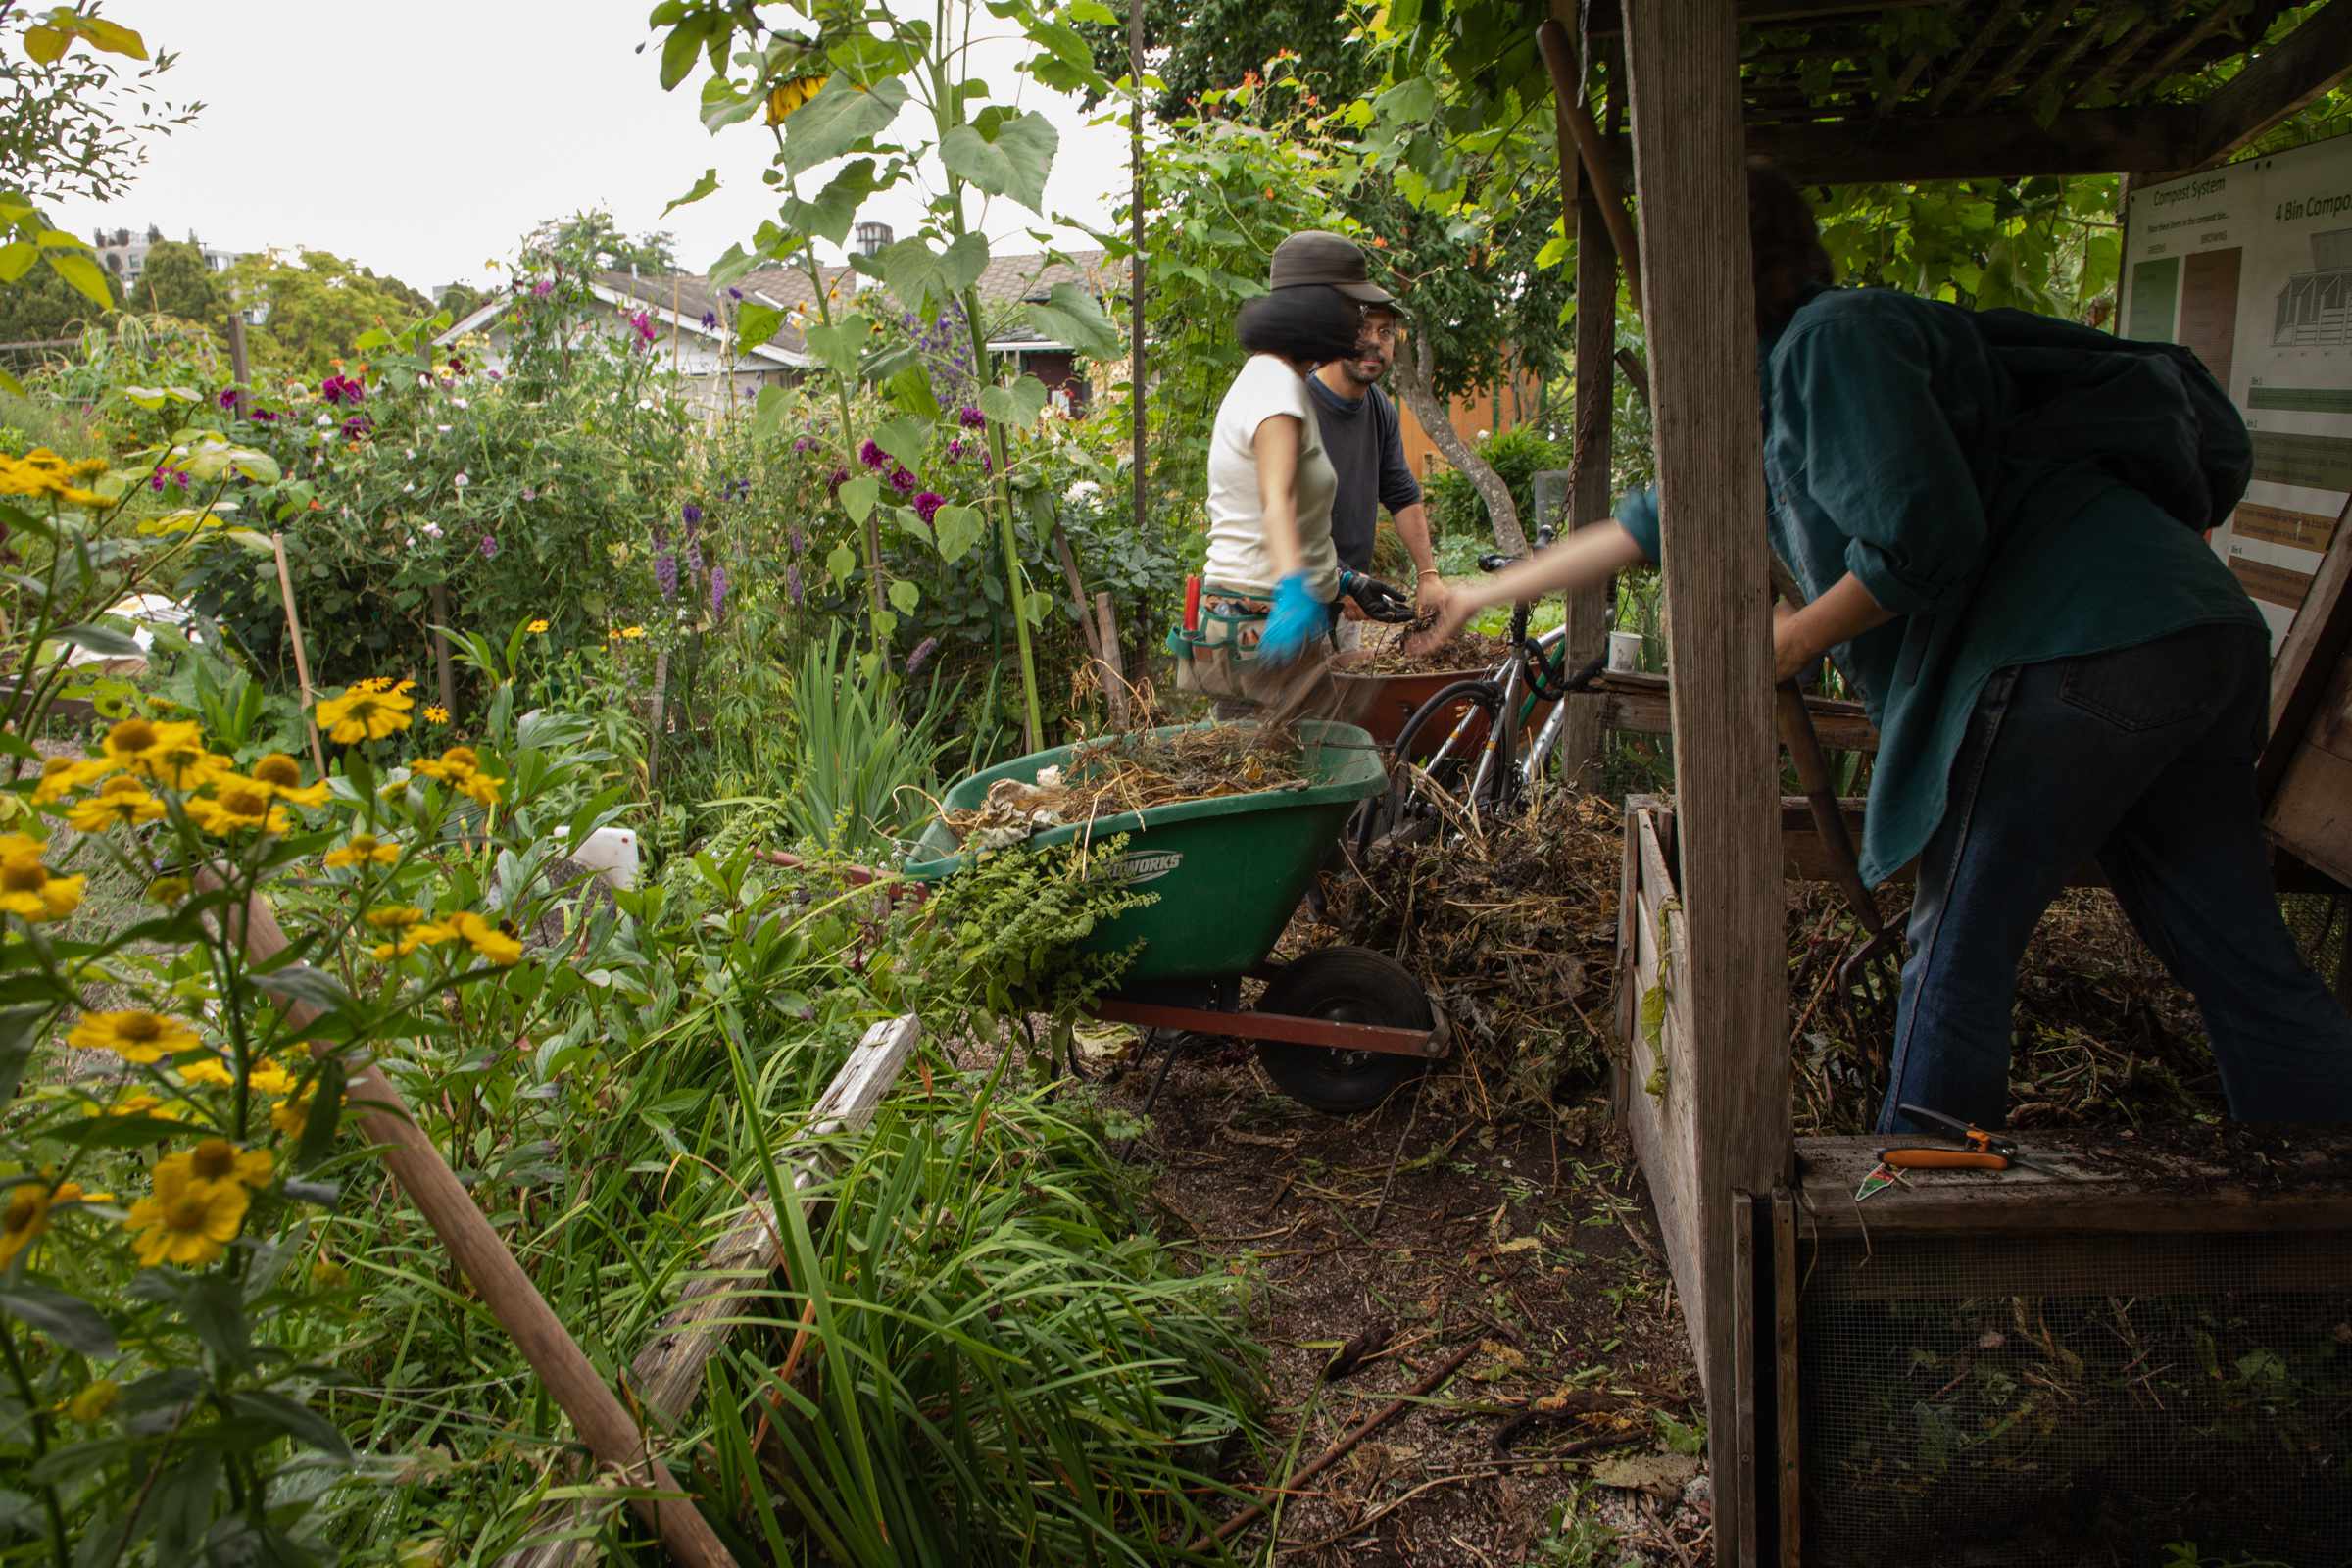 A photo taken from the inside of the compast section of the garden, various gardeners hold wheel barrows full of compost